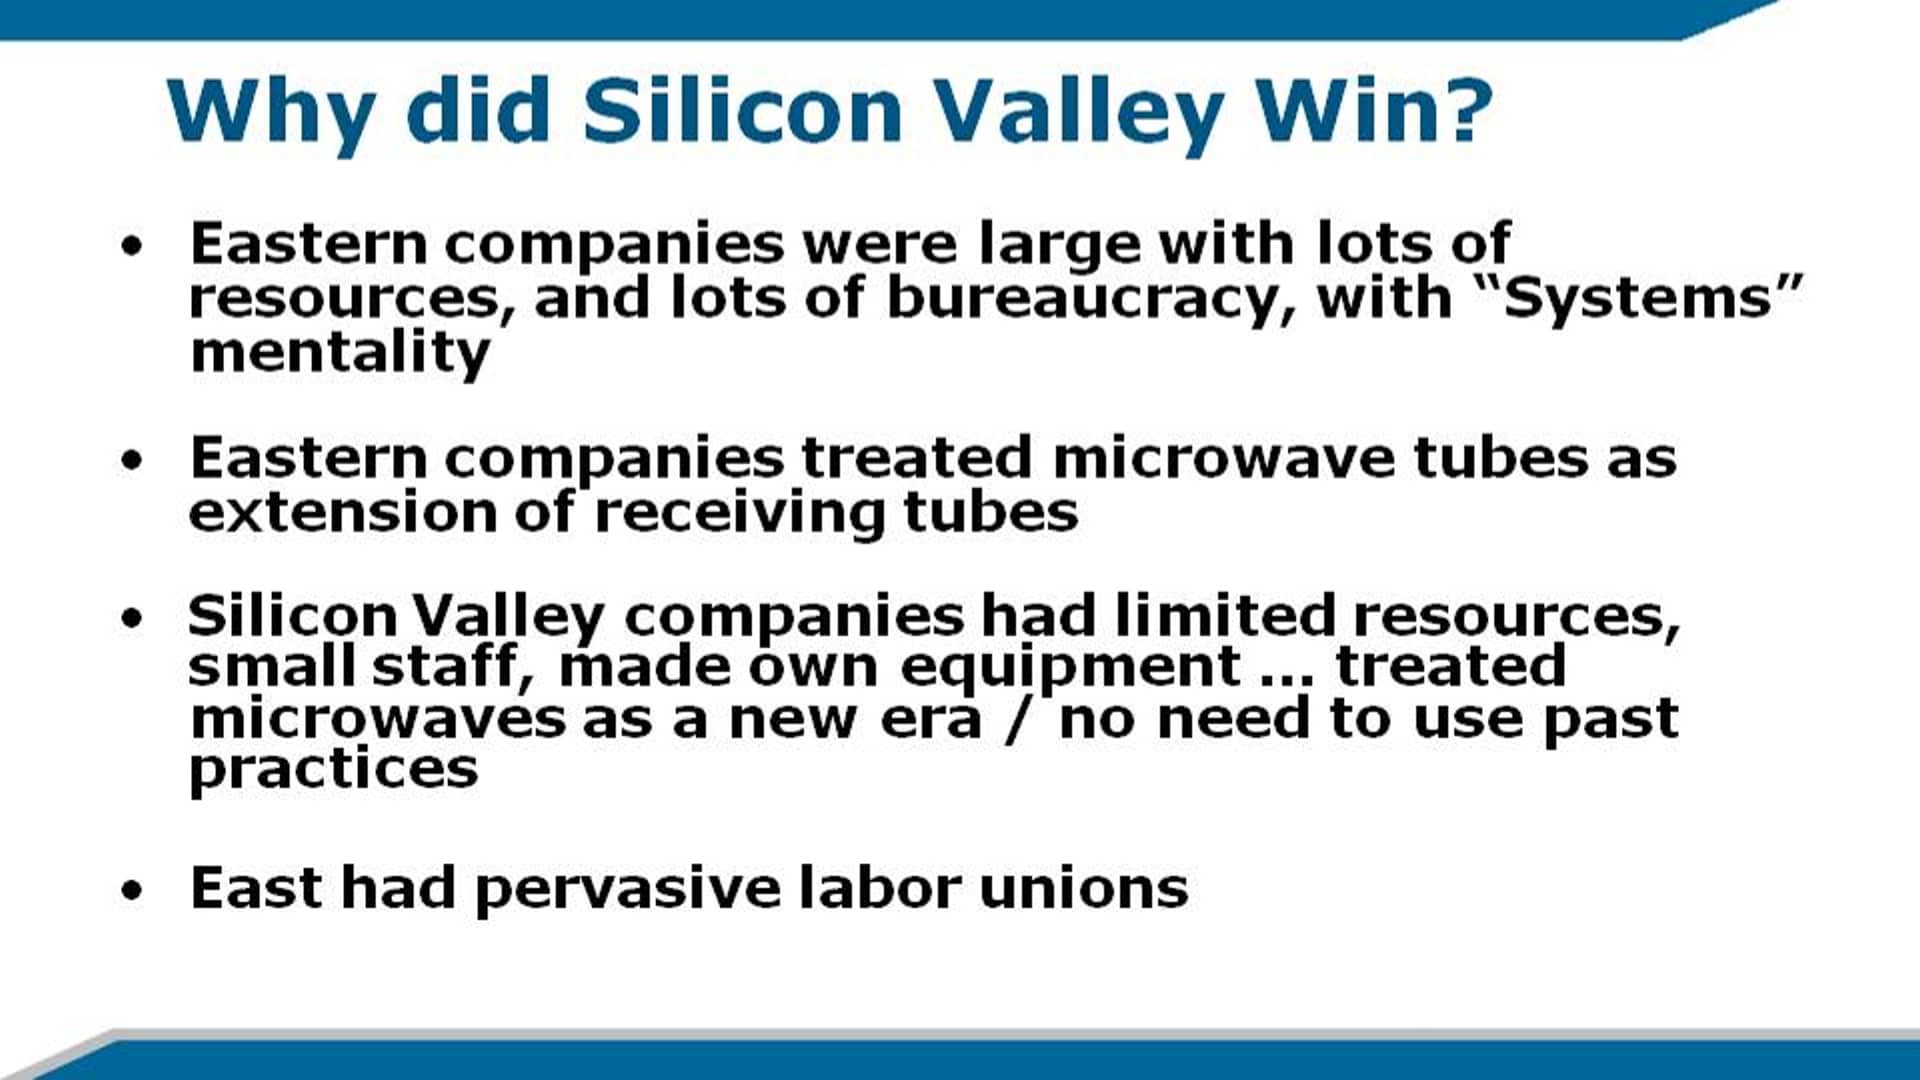 Silicon Valley’s Early Advantages